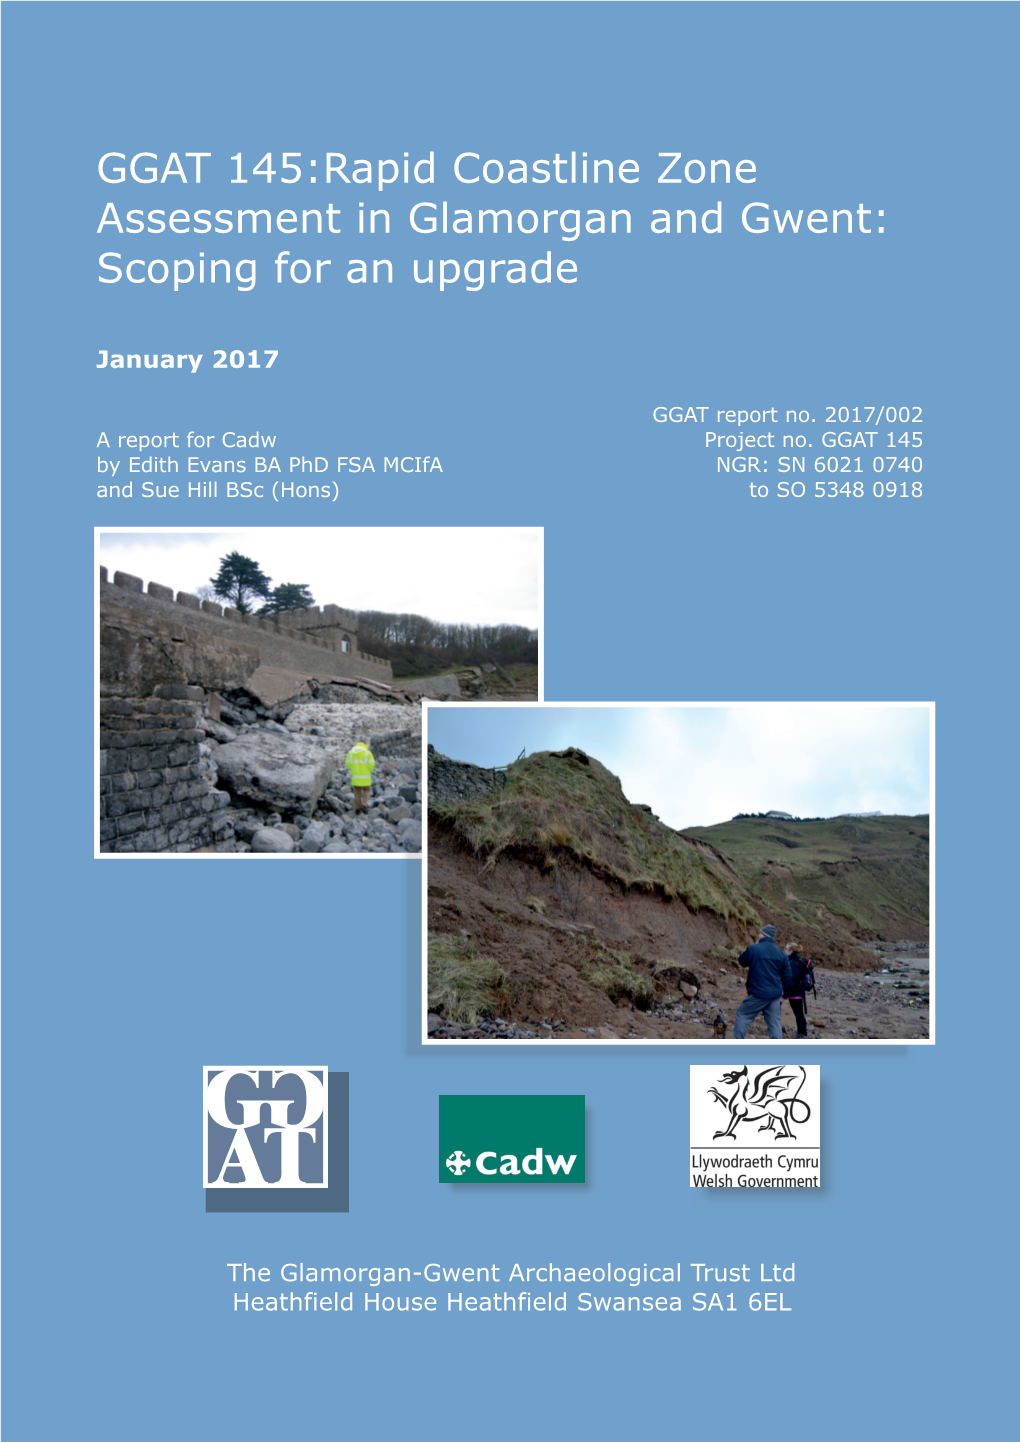 GGAT 145:Rapid Coastline Zone Assessment in Glamorgan and Gwent: Scoping for an Upgrade